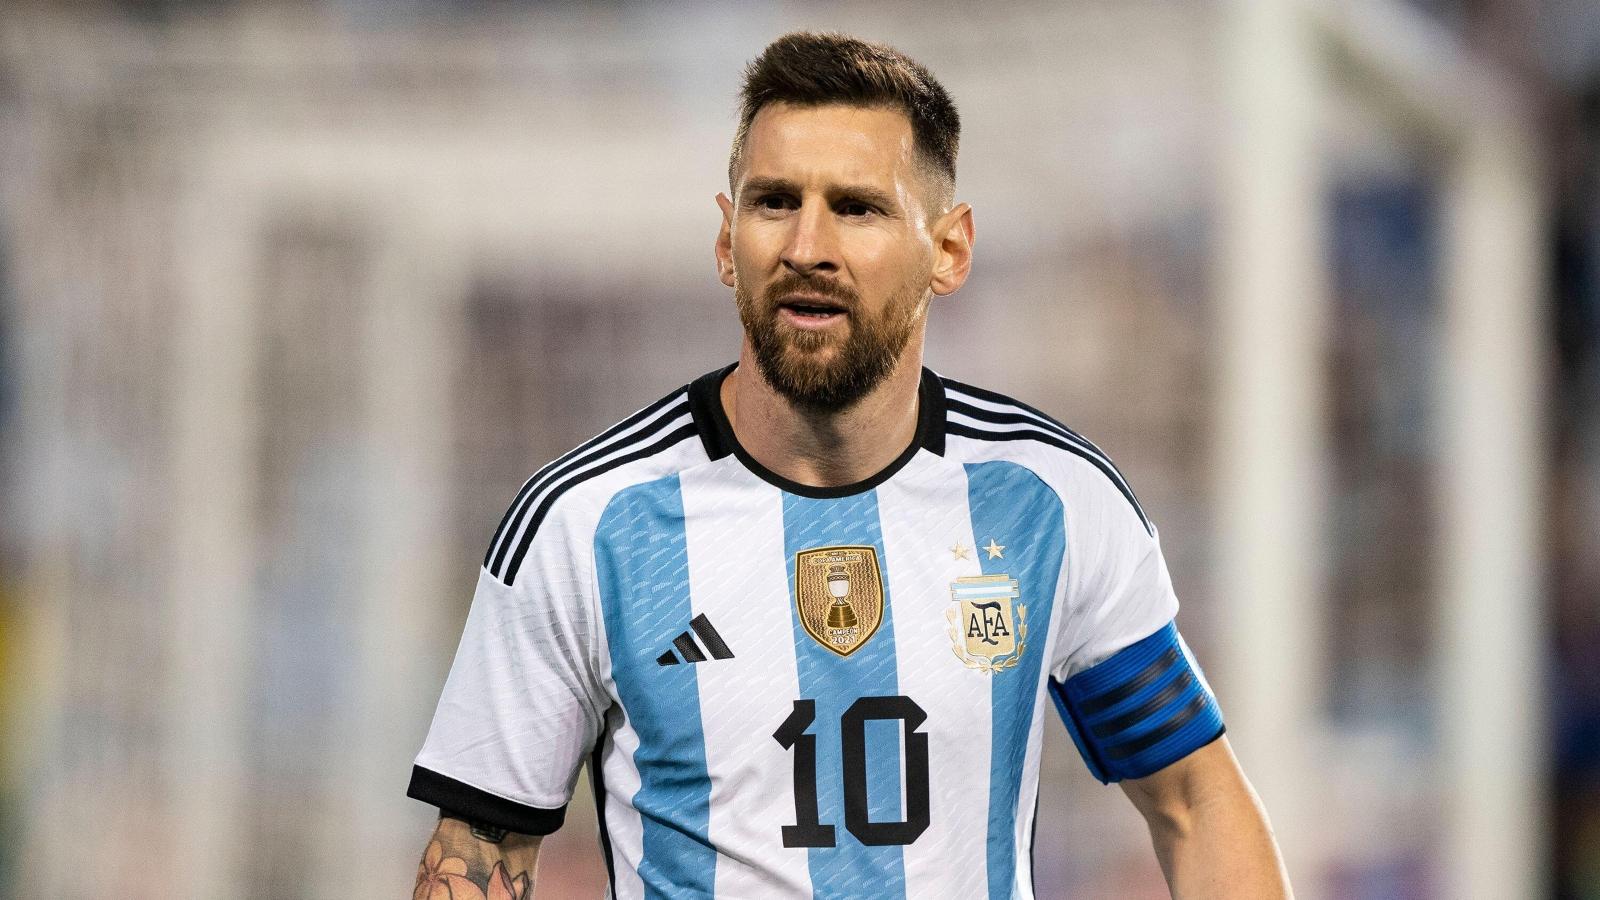 Watch footballing great Lionel Messi in the UAE for only 25 dirhams